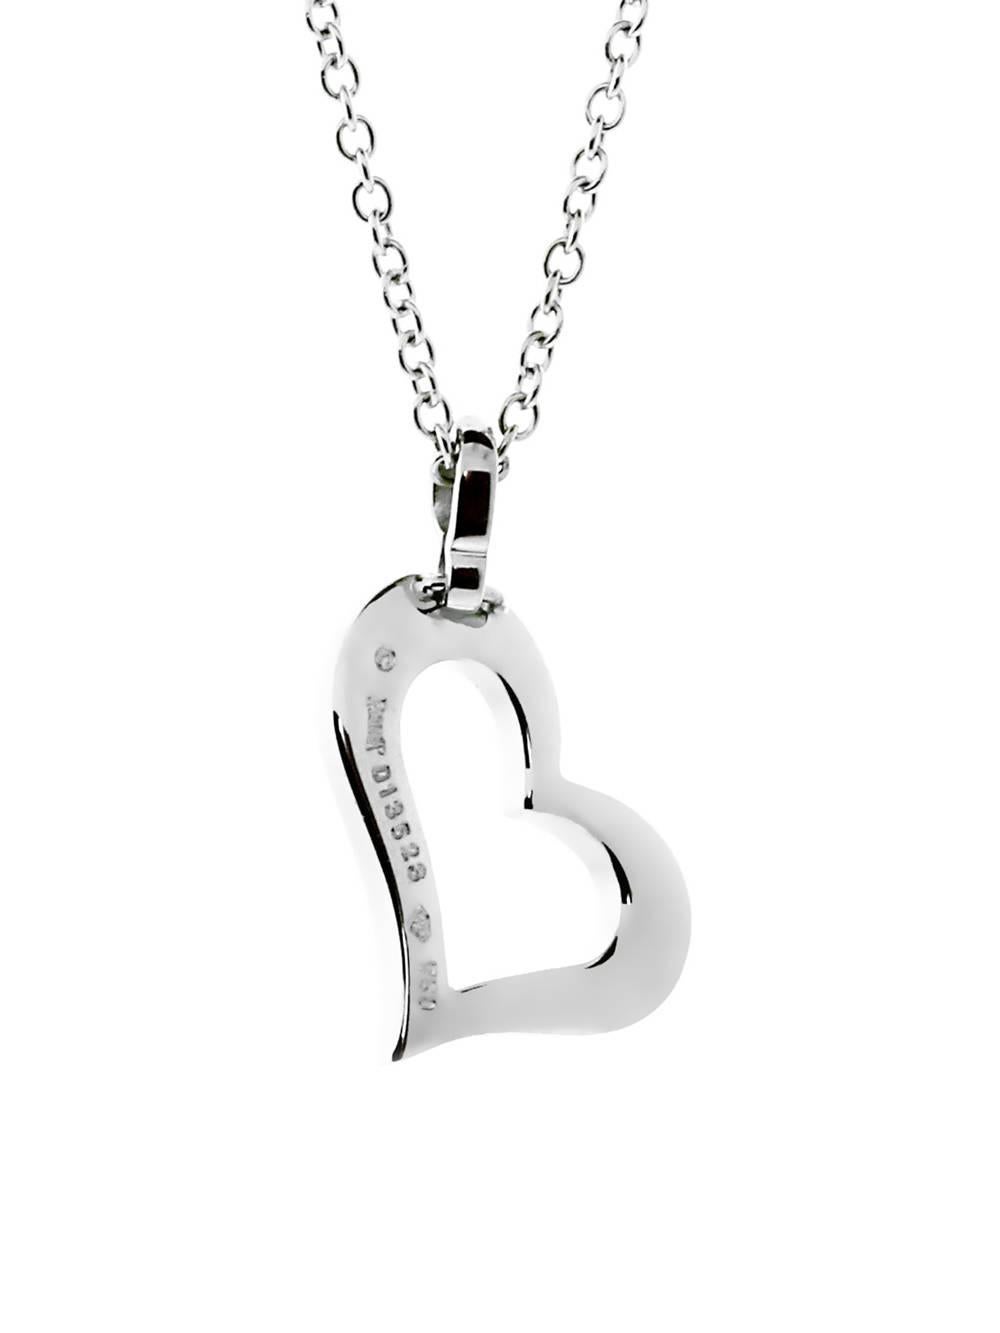 piaget heart necklace